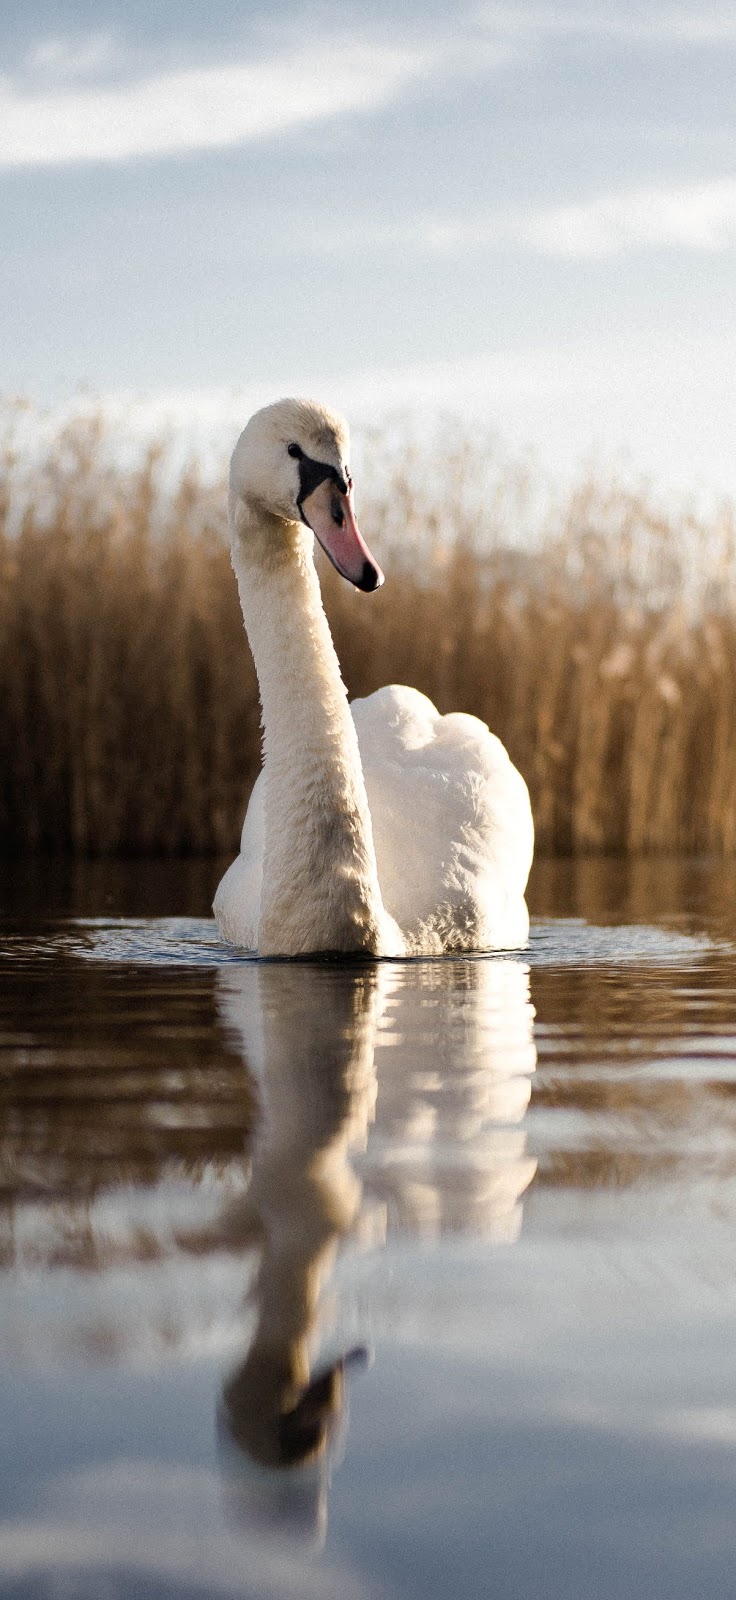 Picture of a swan at a lake.